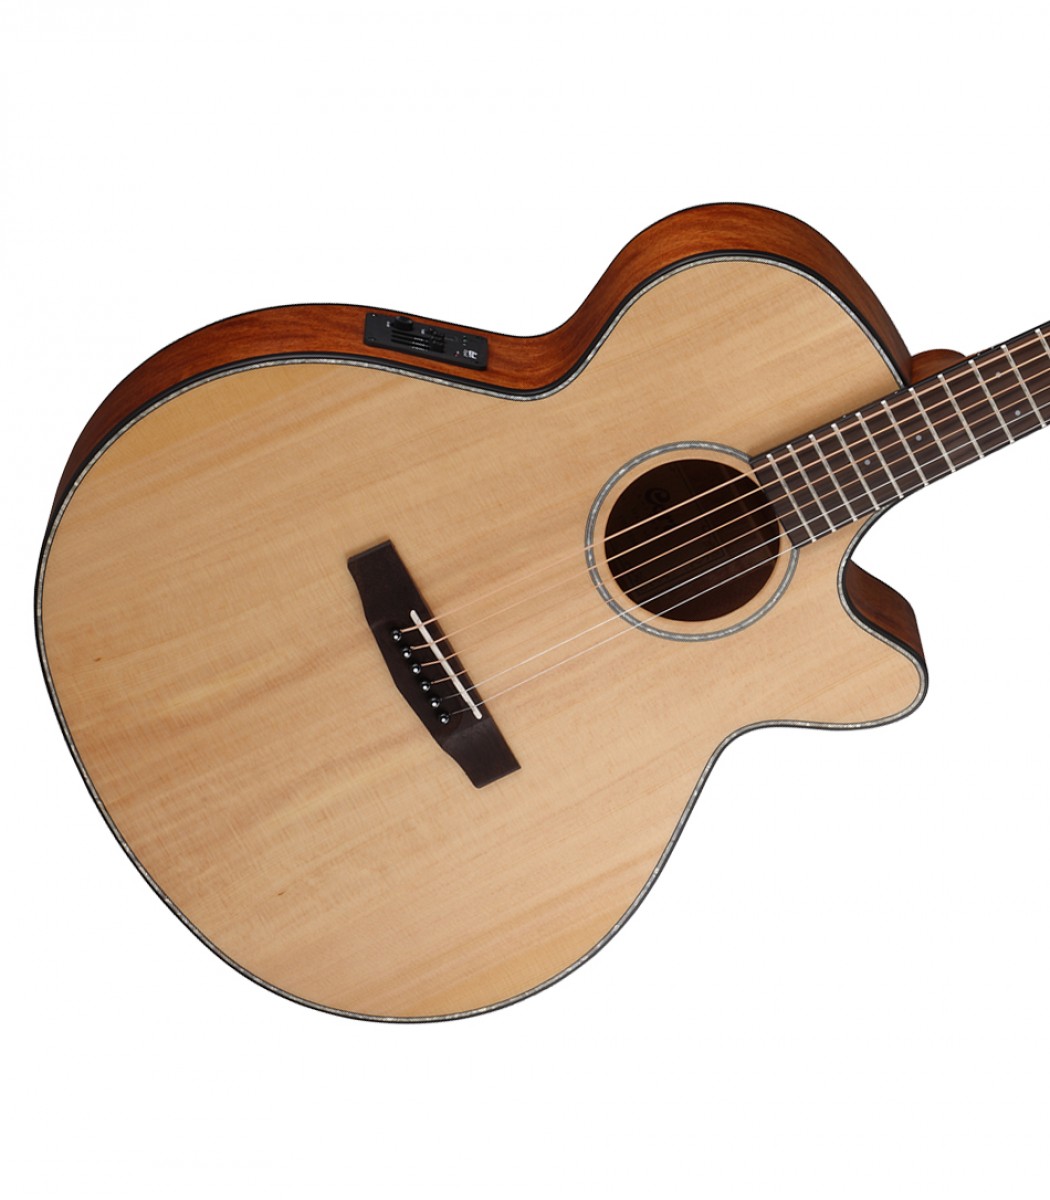 Cort SFX-E Acoustic Guitar with Pickup